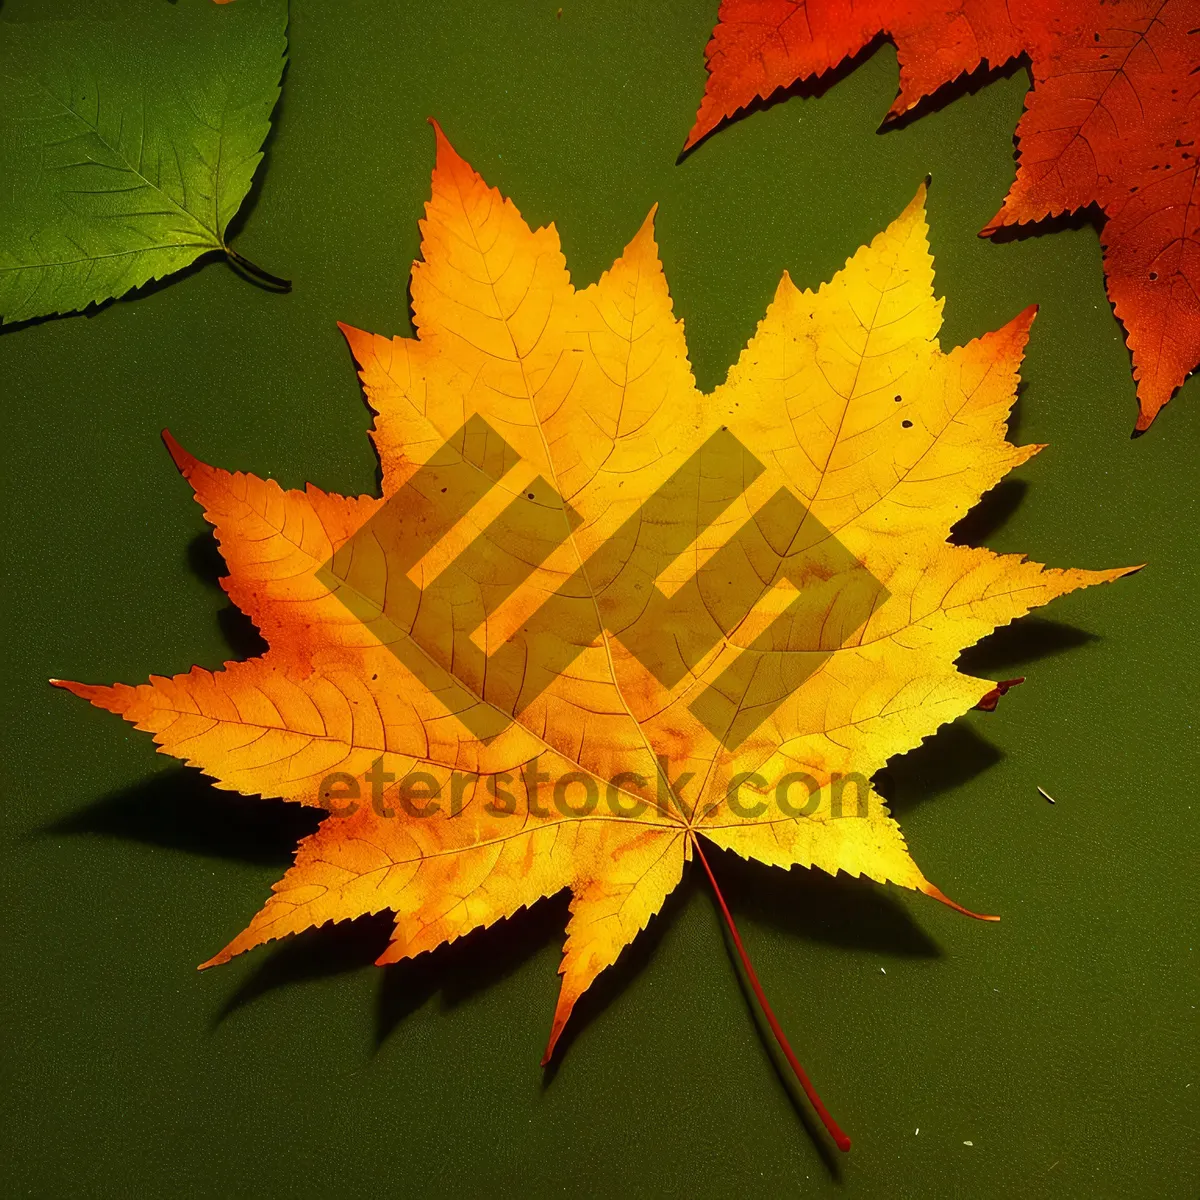 Picture of Vibrant Autumn Leaves in Golden Hues